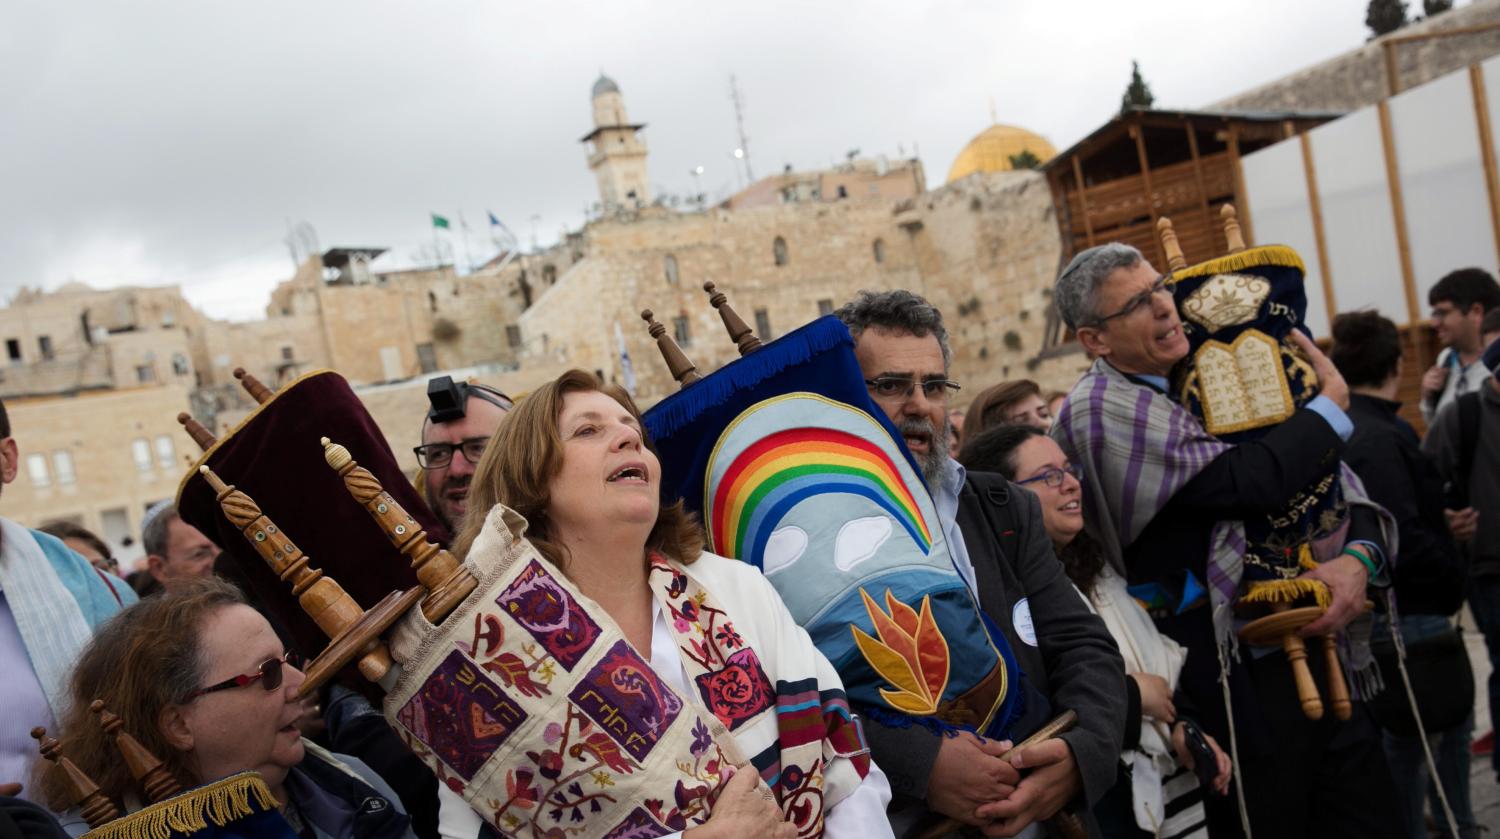 Anat Hoffman (2nd L), chair of "Women of the Wall", an activist group who are challenging the Orthodox monopoly over rites at Western Wall, holds a Torah scroll during a monthly prayer at the Western Wall, Judaism's holiest prayer site, in Jerusalem's Old City November 2, 2016. REUTERS/Michal Fattal ISRAEL OUT. NO COMMERCIAL OR EDITORIAL SALES IN ISRAEL - RTX2RJD5